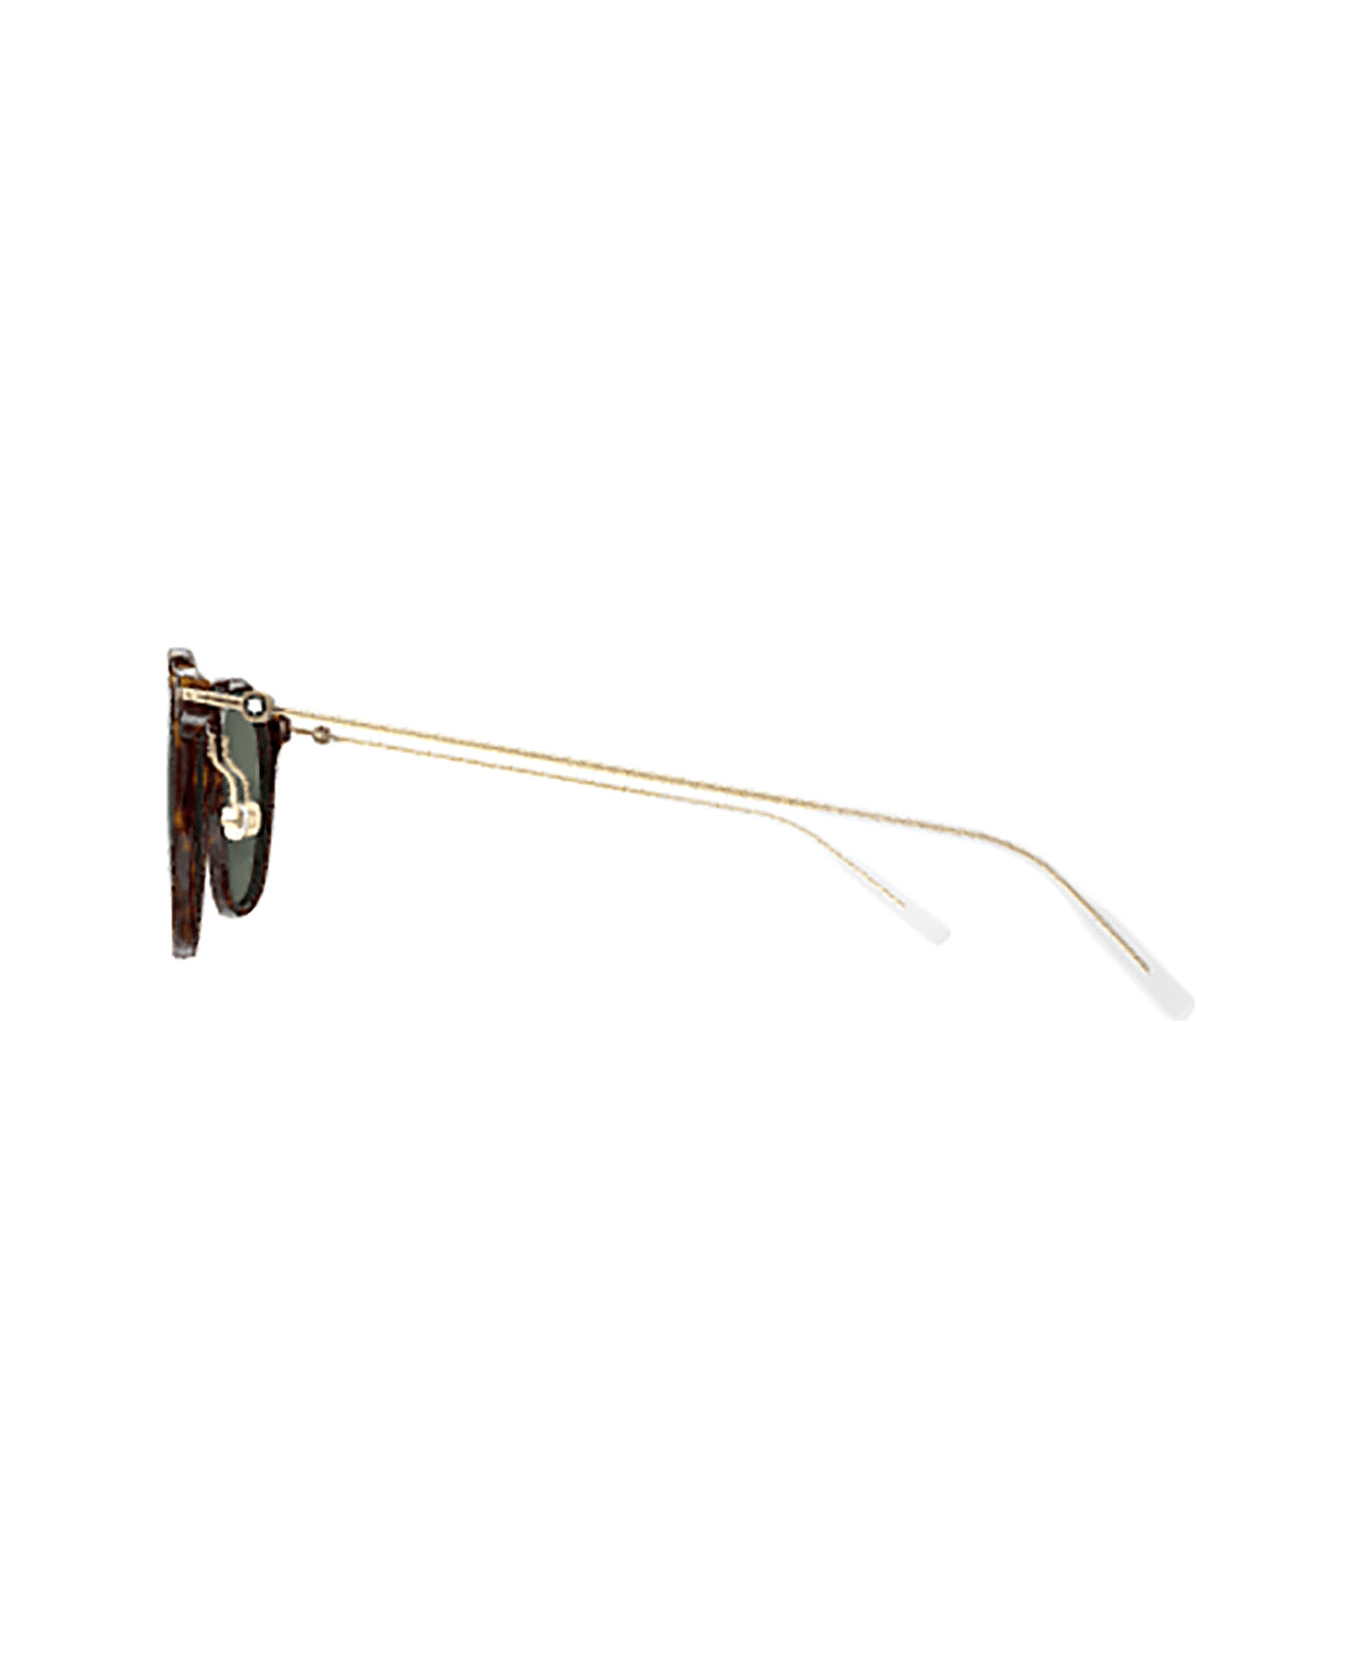 Montblanc MB0098S Sunglasses - Refresh your sunglasses collection with the